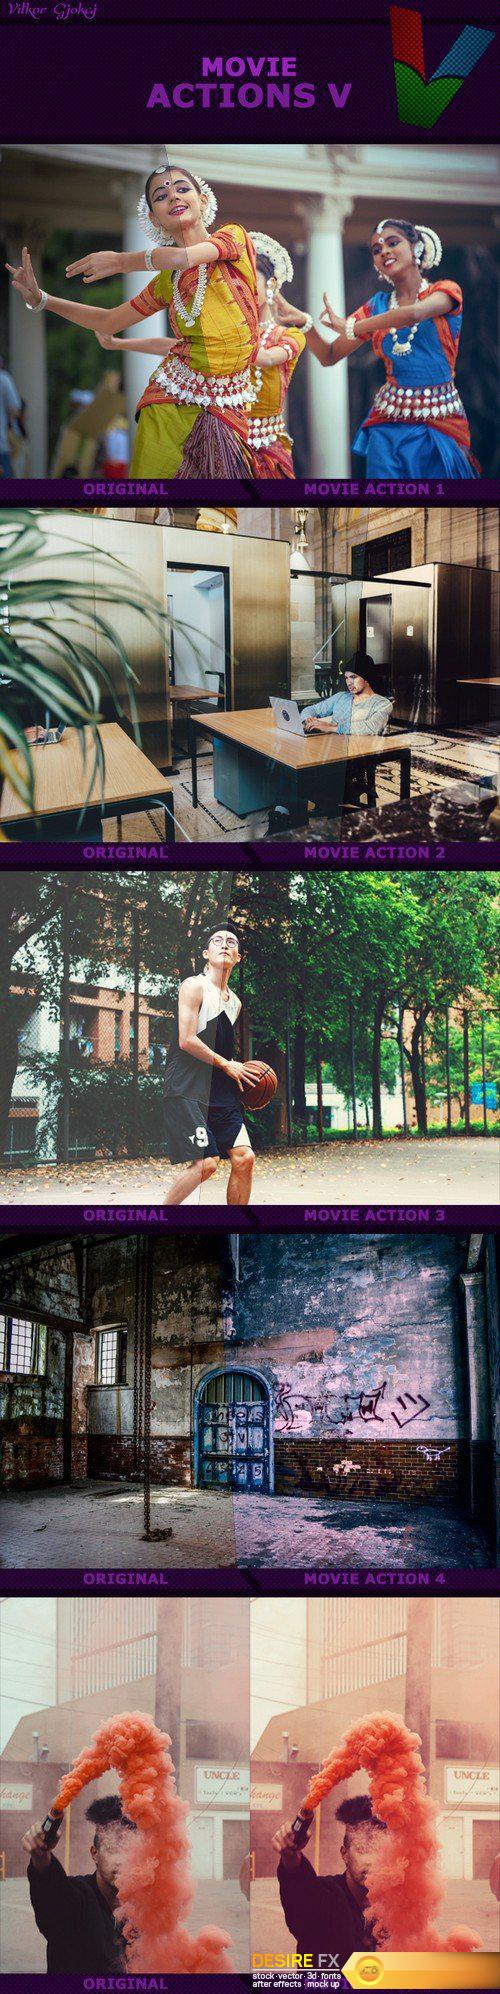 Graphicriver - Movie Actions V 16321868